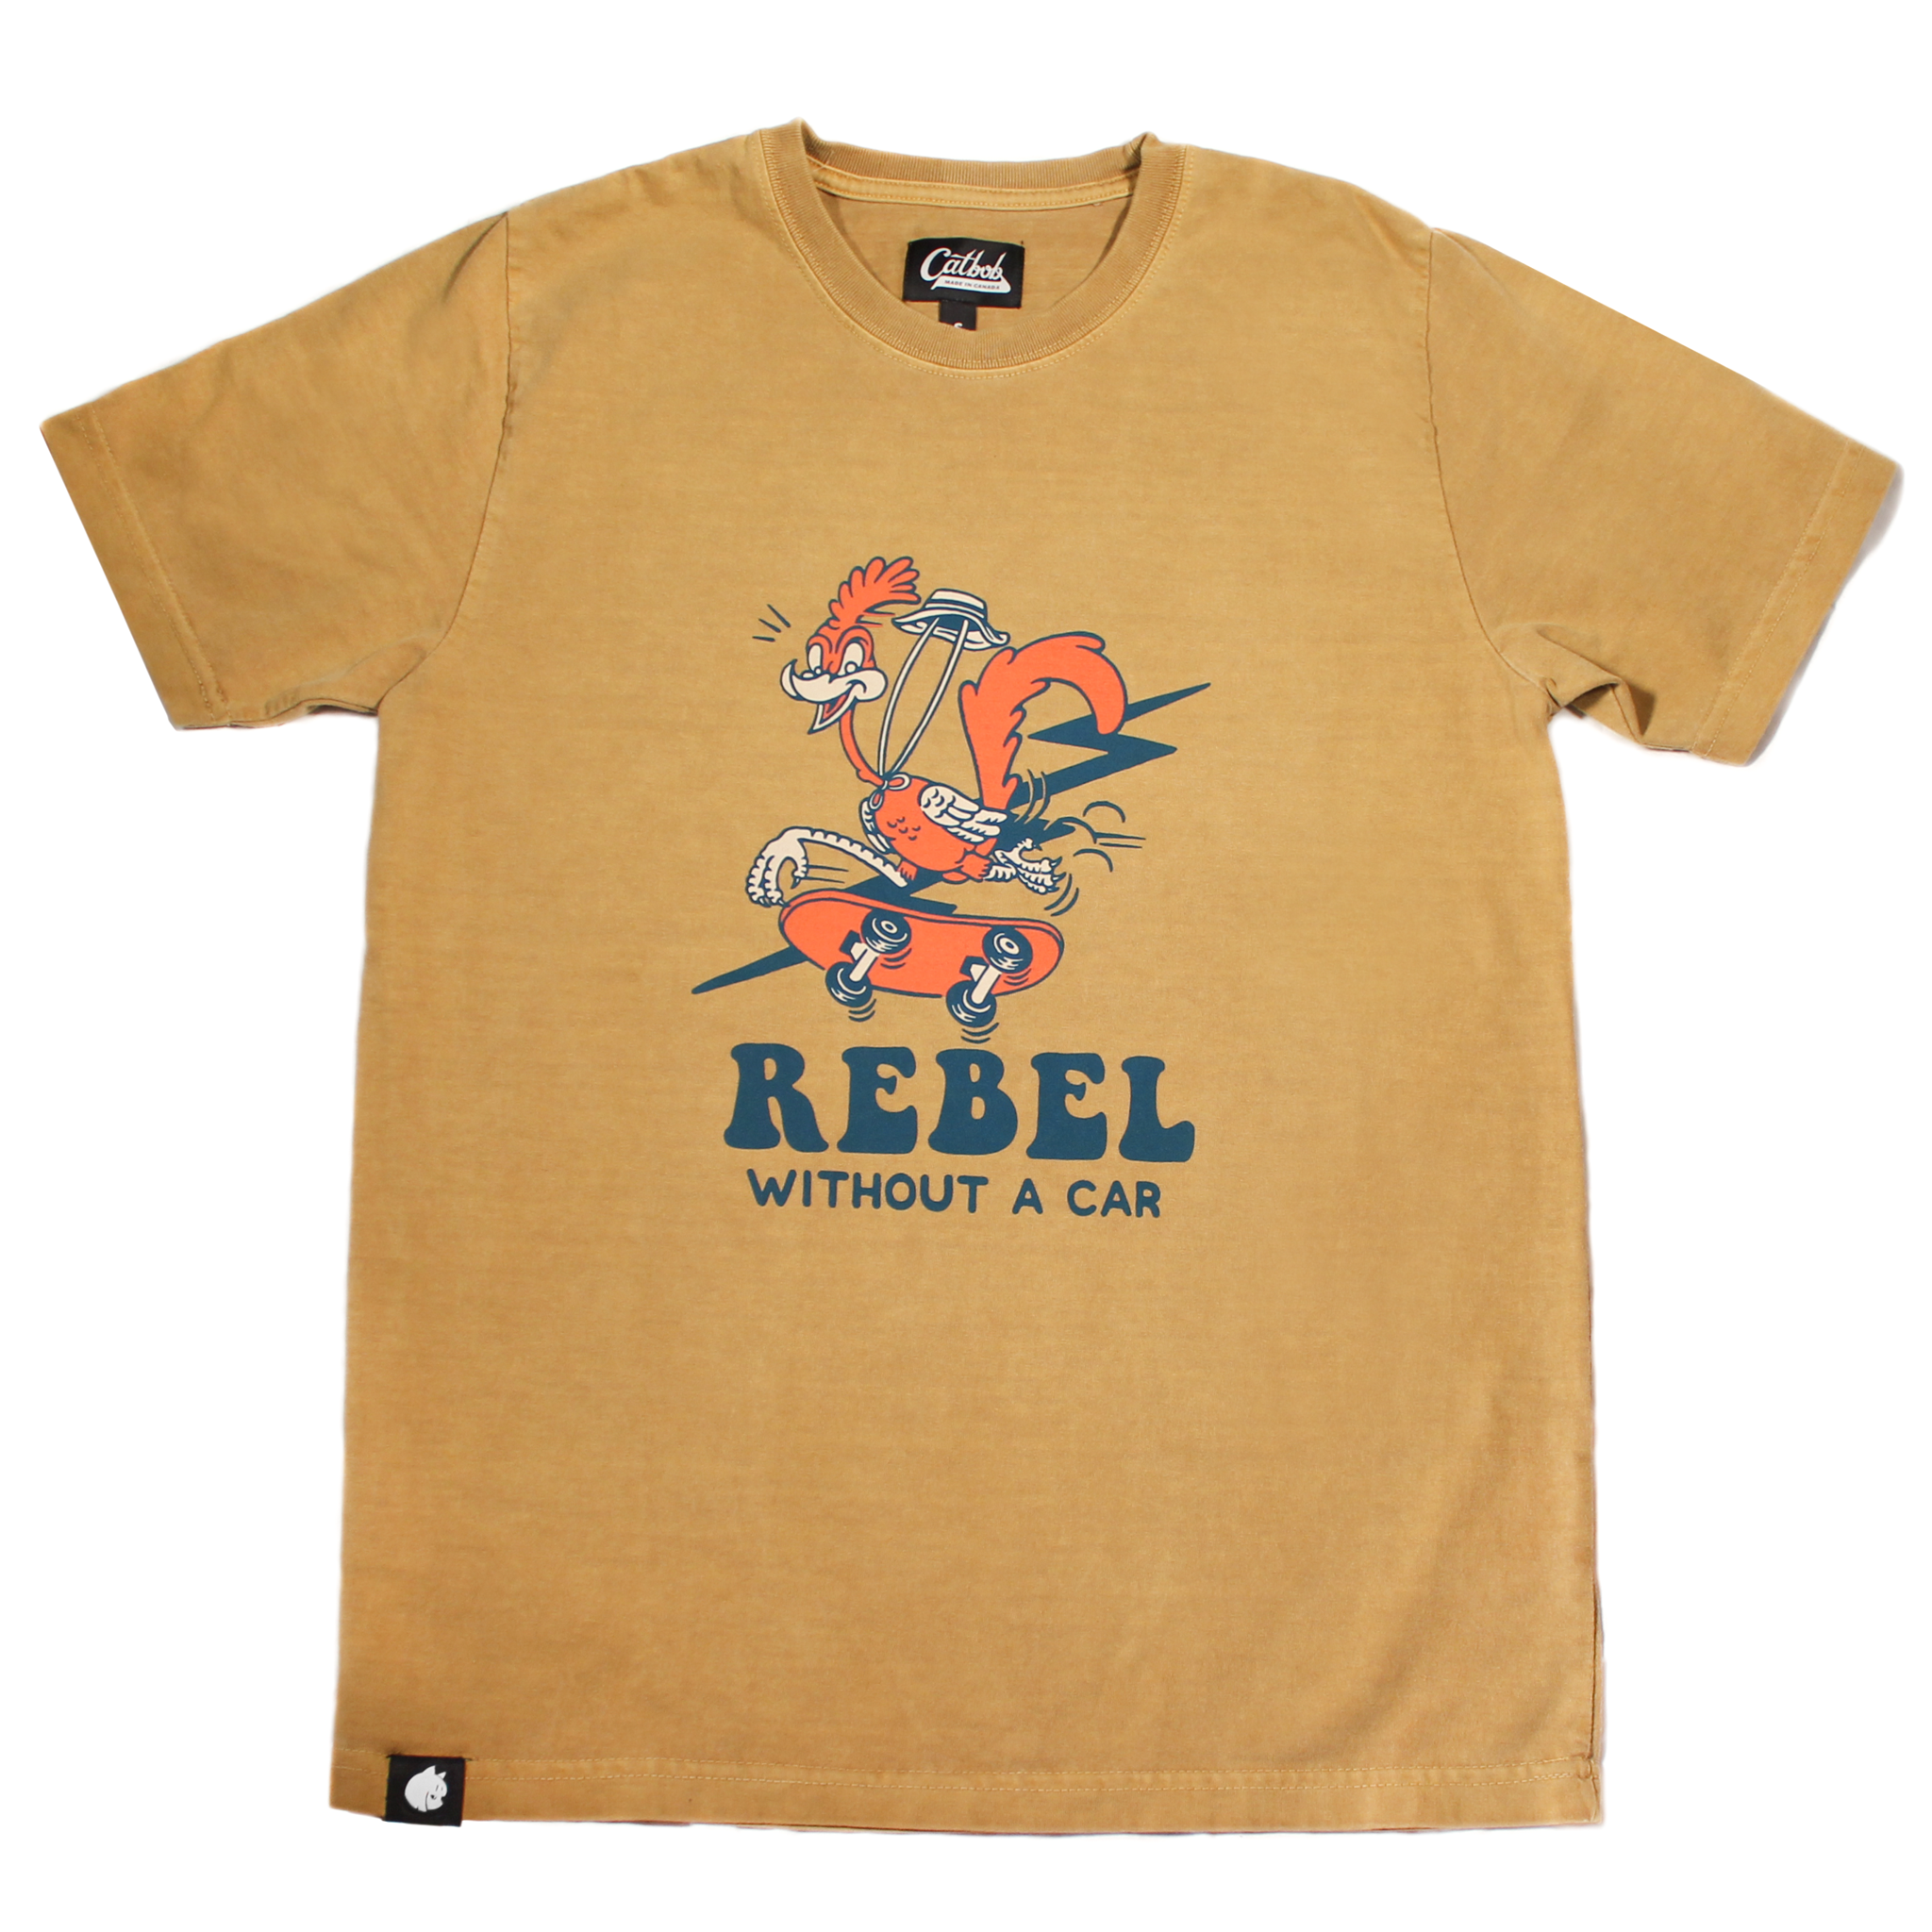 Rebel Without a Car Tee